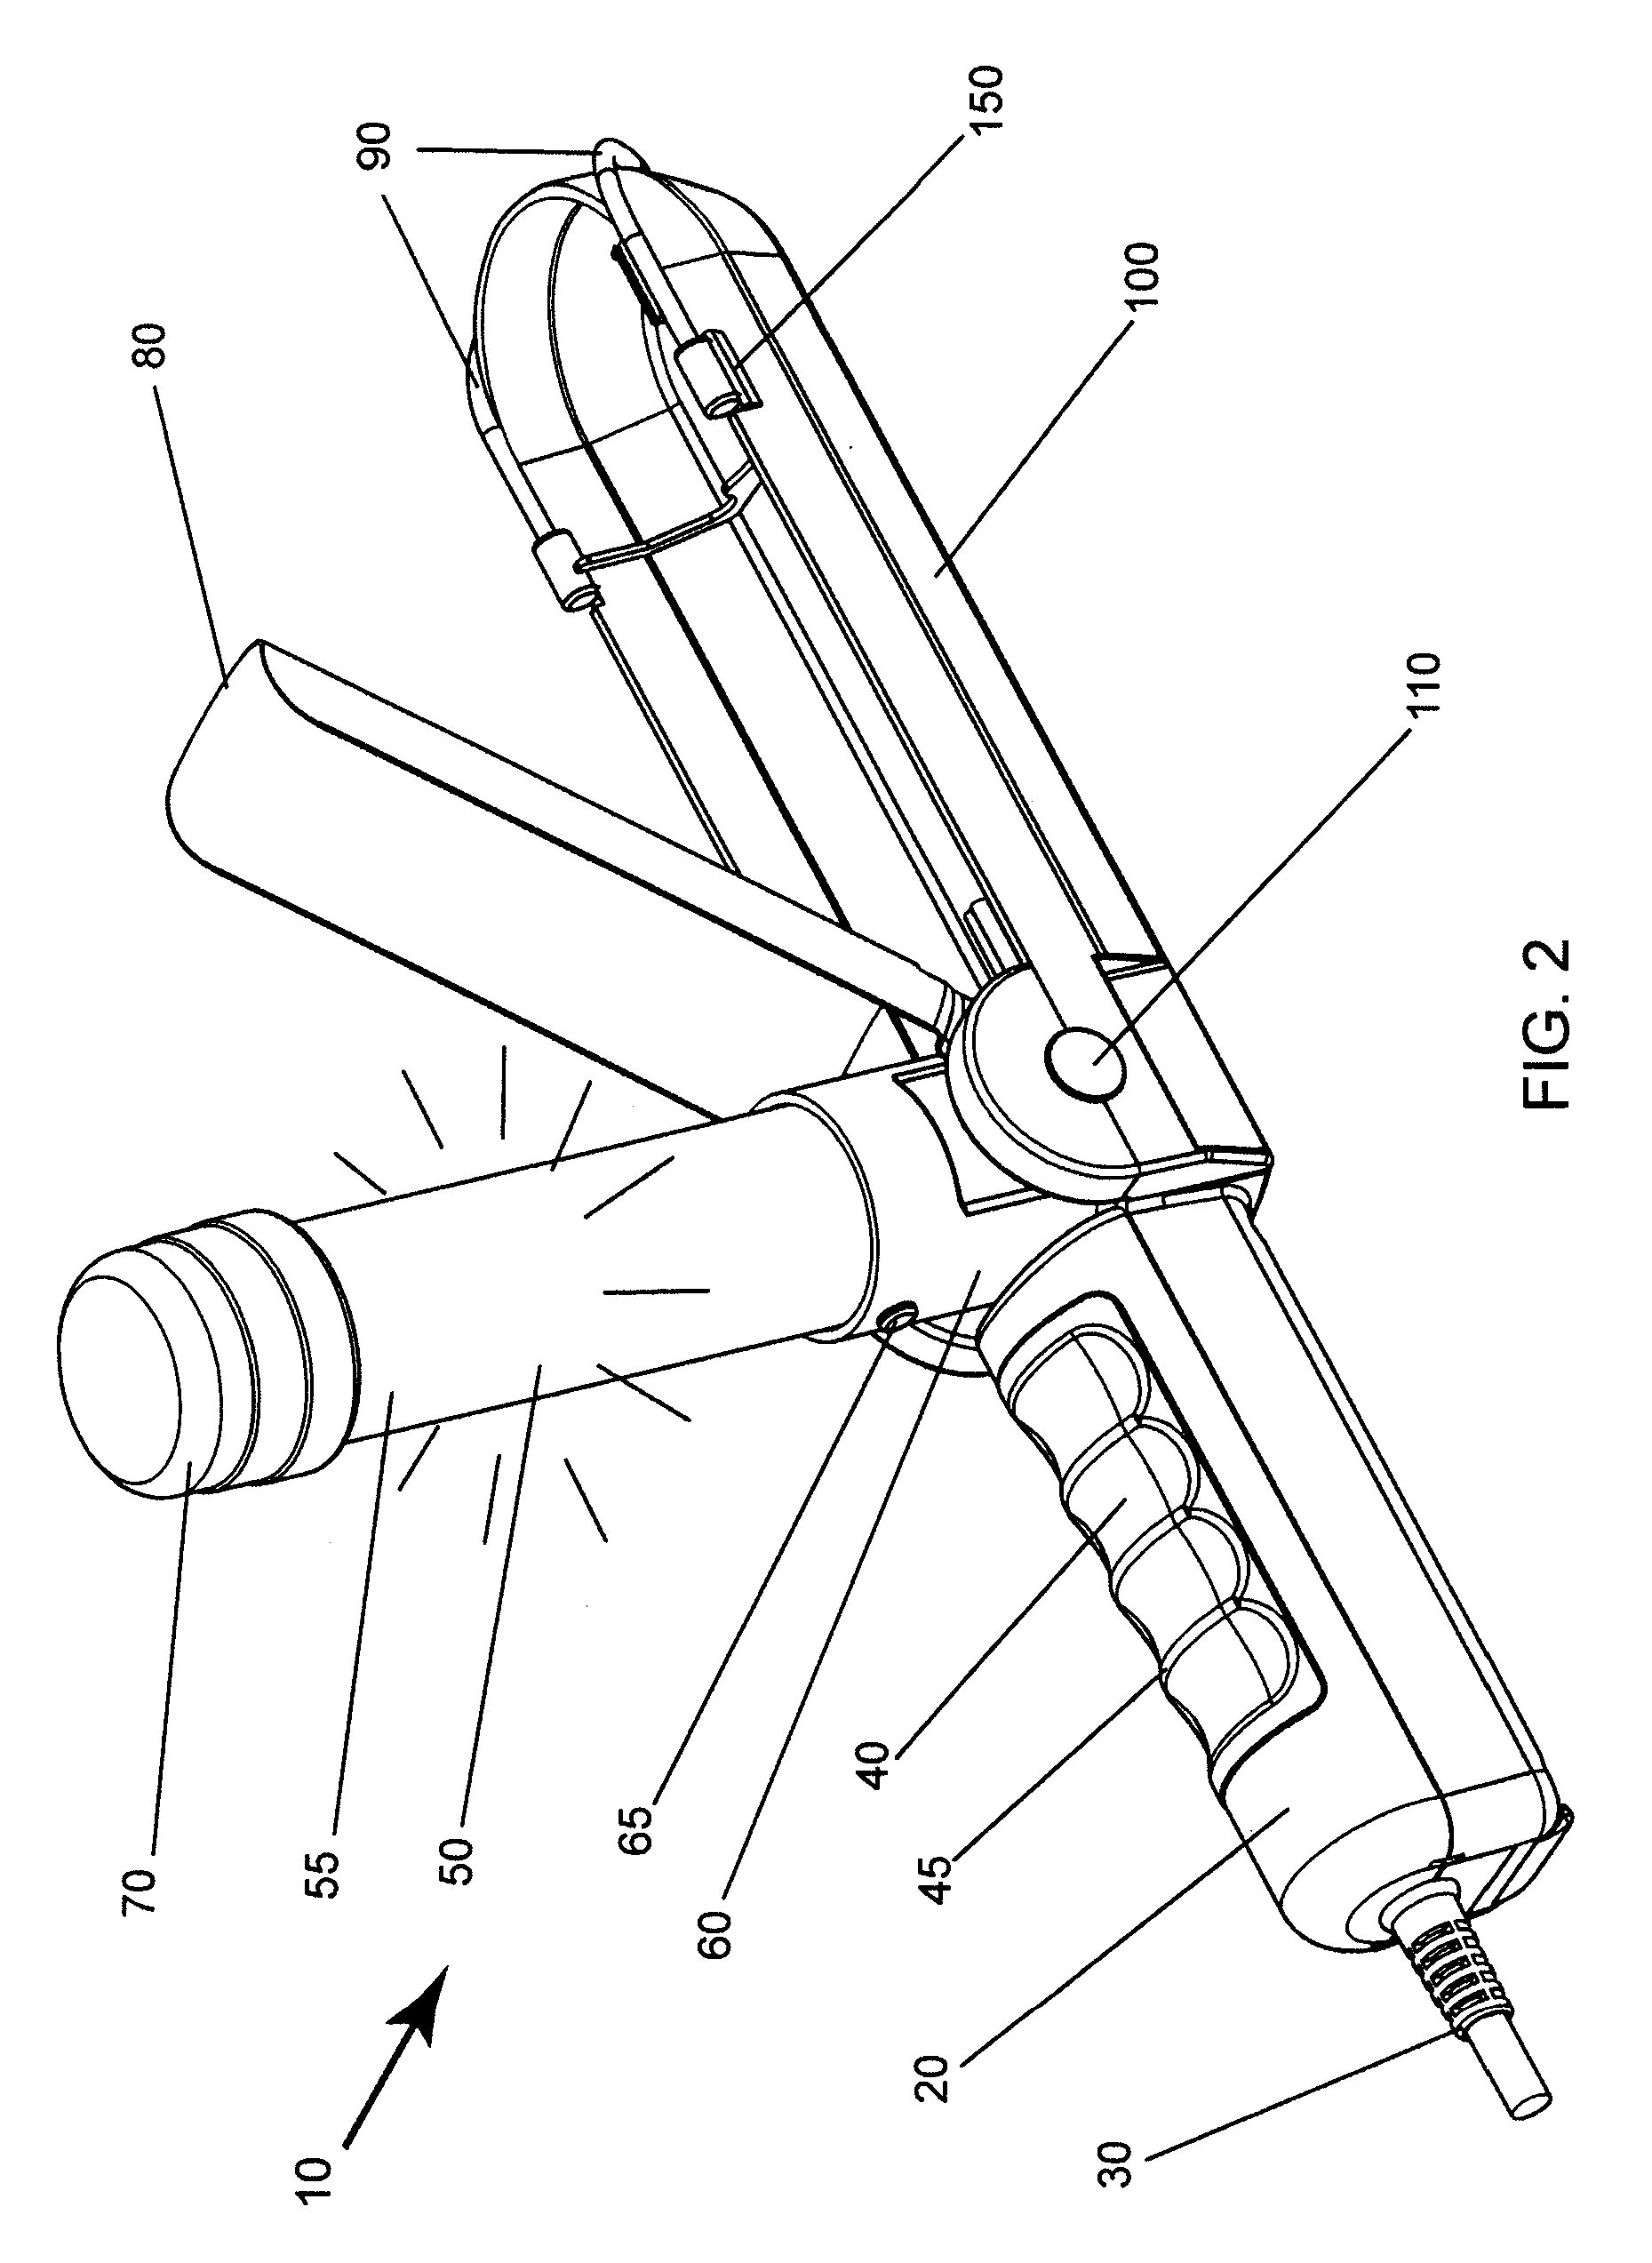 Adjustable utility light and methods of use thereof